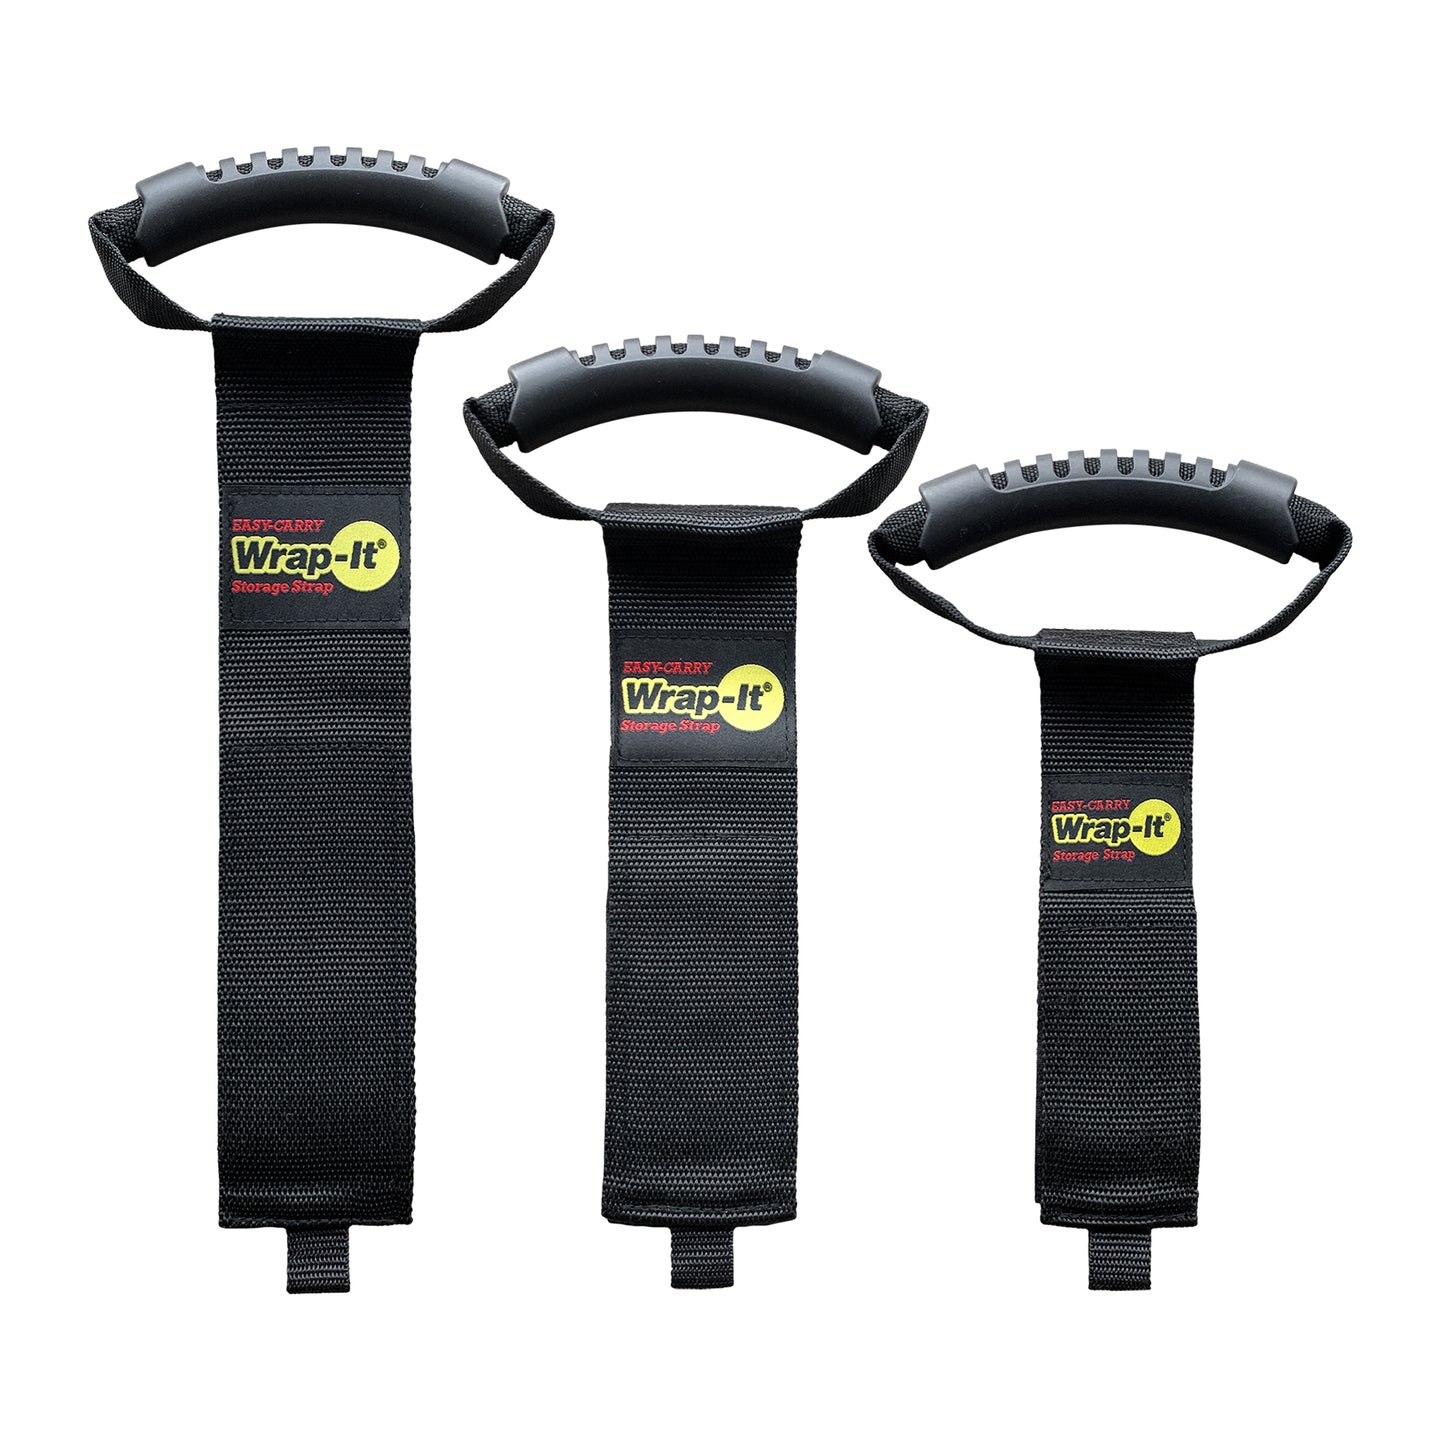 Easy-Carry Storage Straps - Assorted 3-Pack (17", 22", 28")